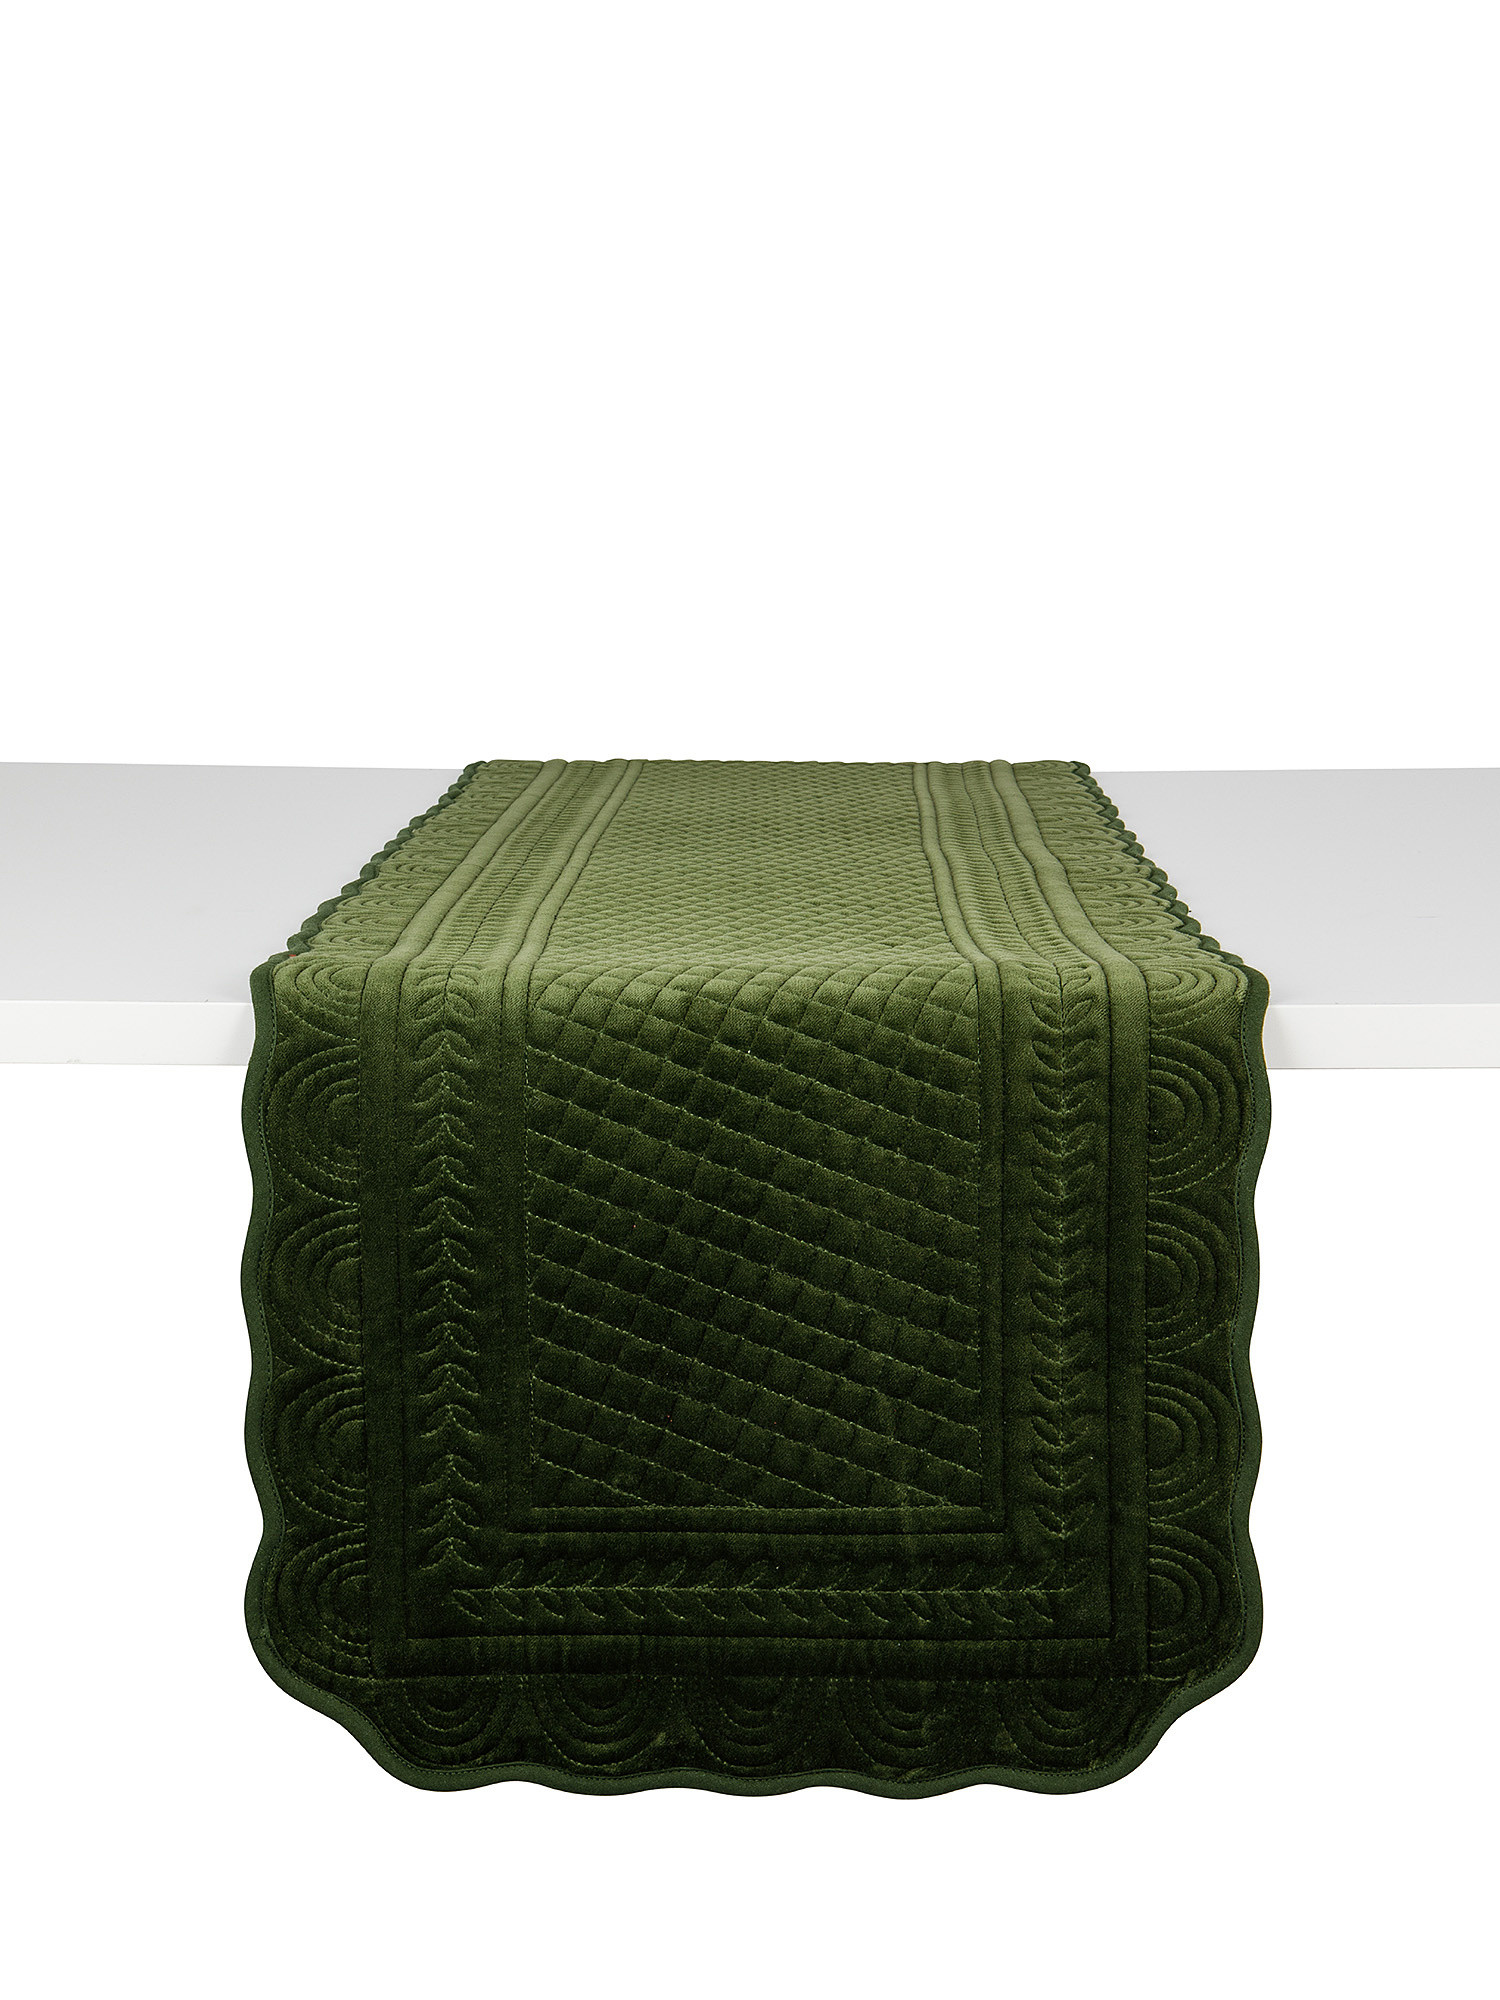 Solid color quilted cotton velvet table runner, Green, large image number 0